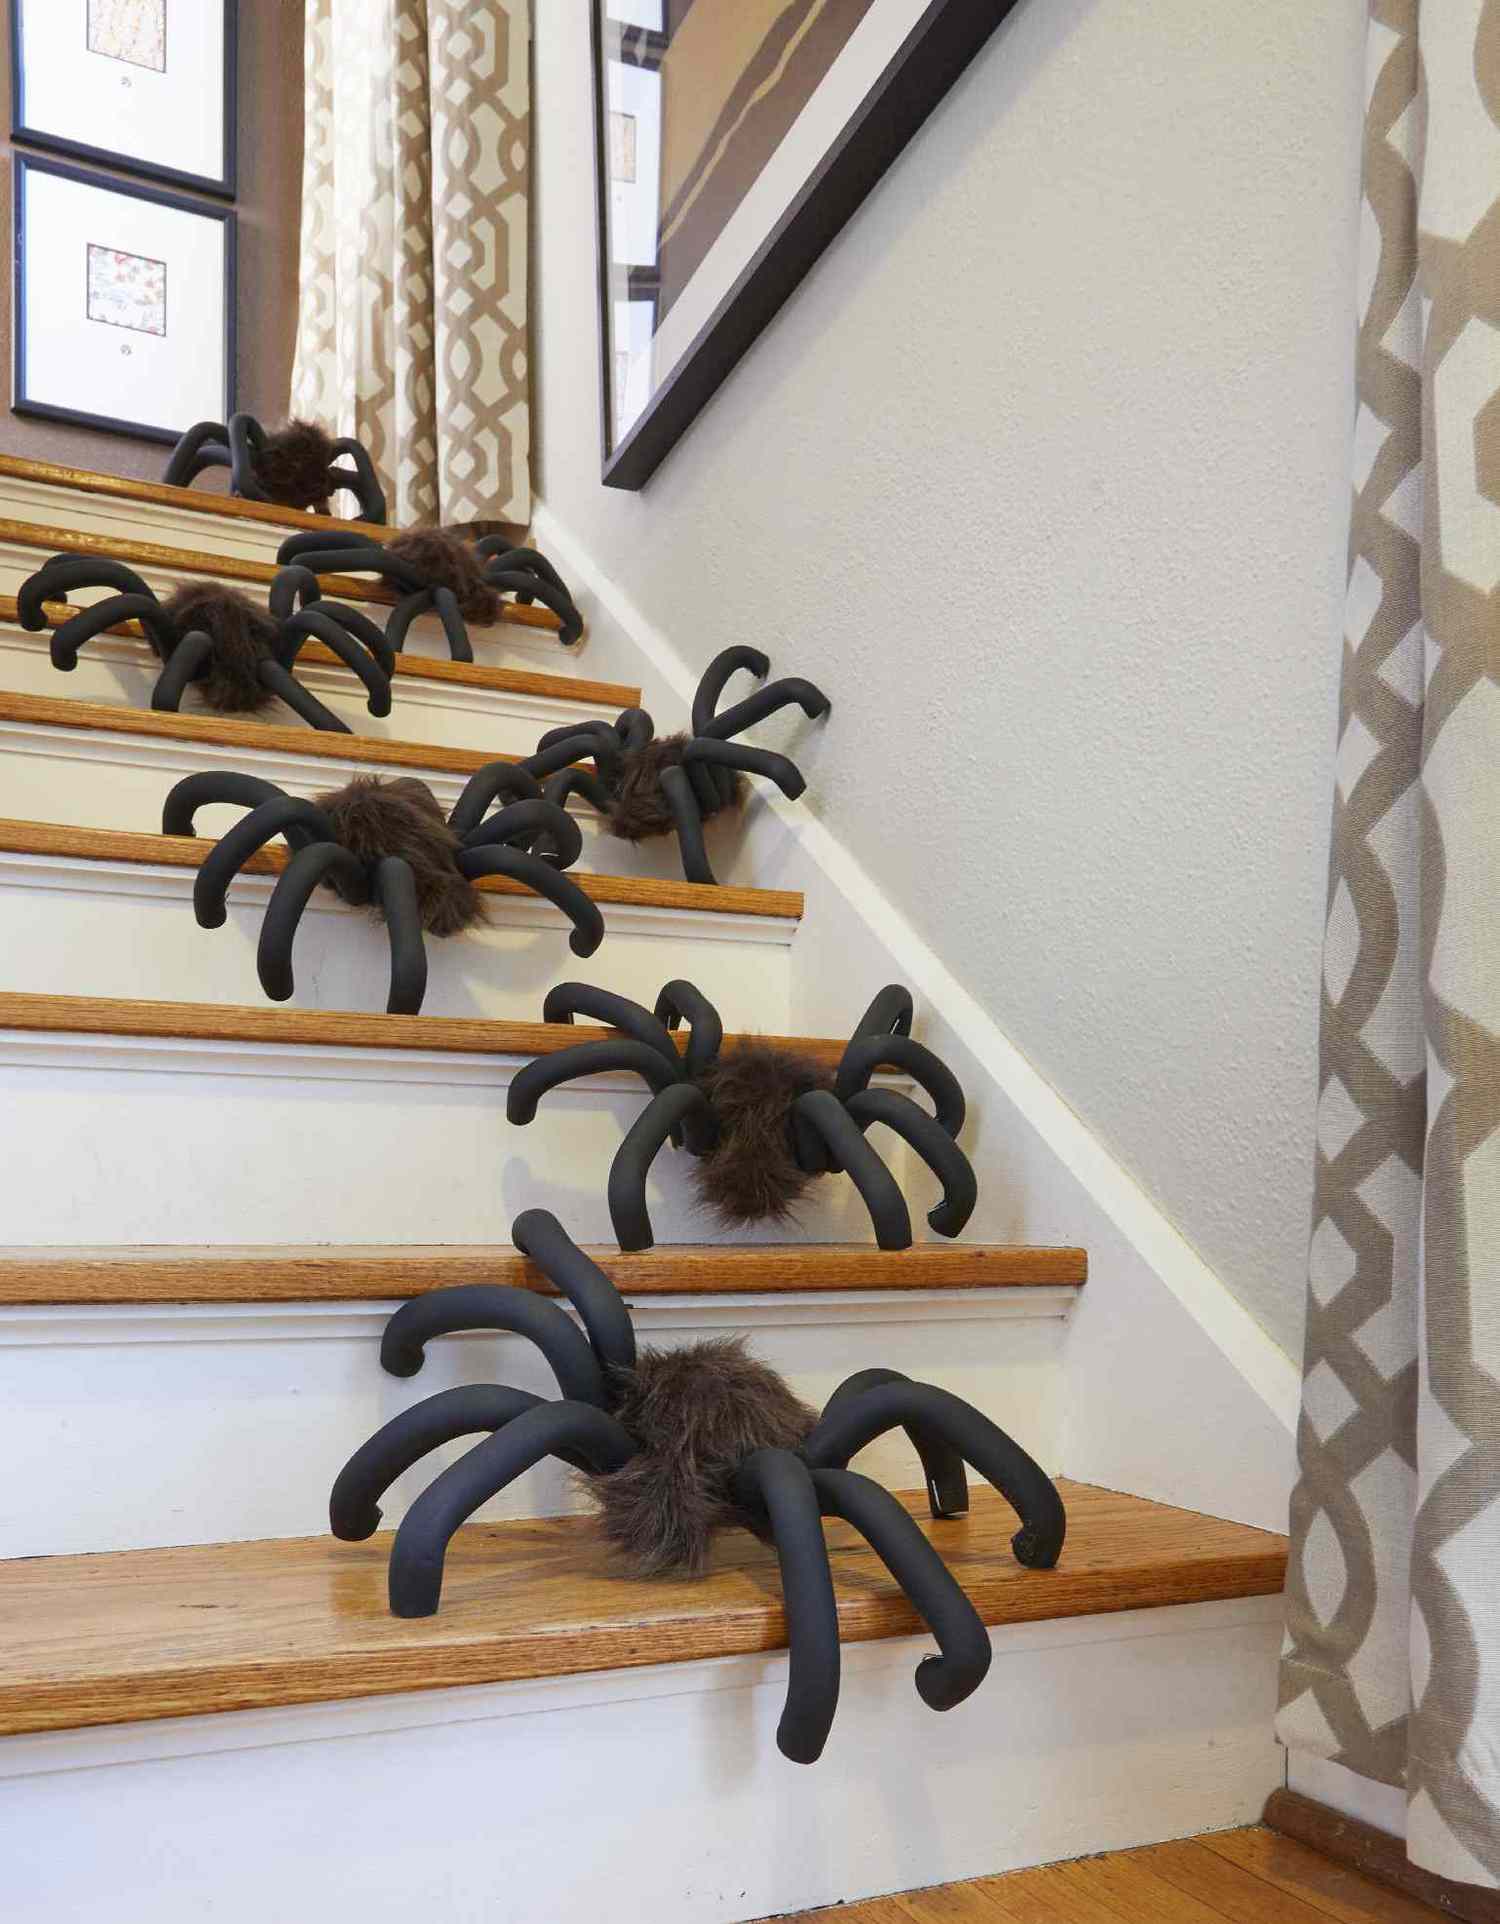 Large DIY fuzzy spiders climbing in a line down stairs